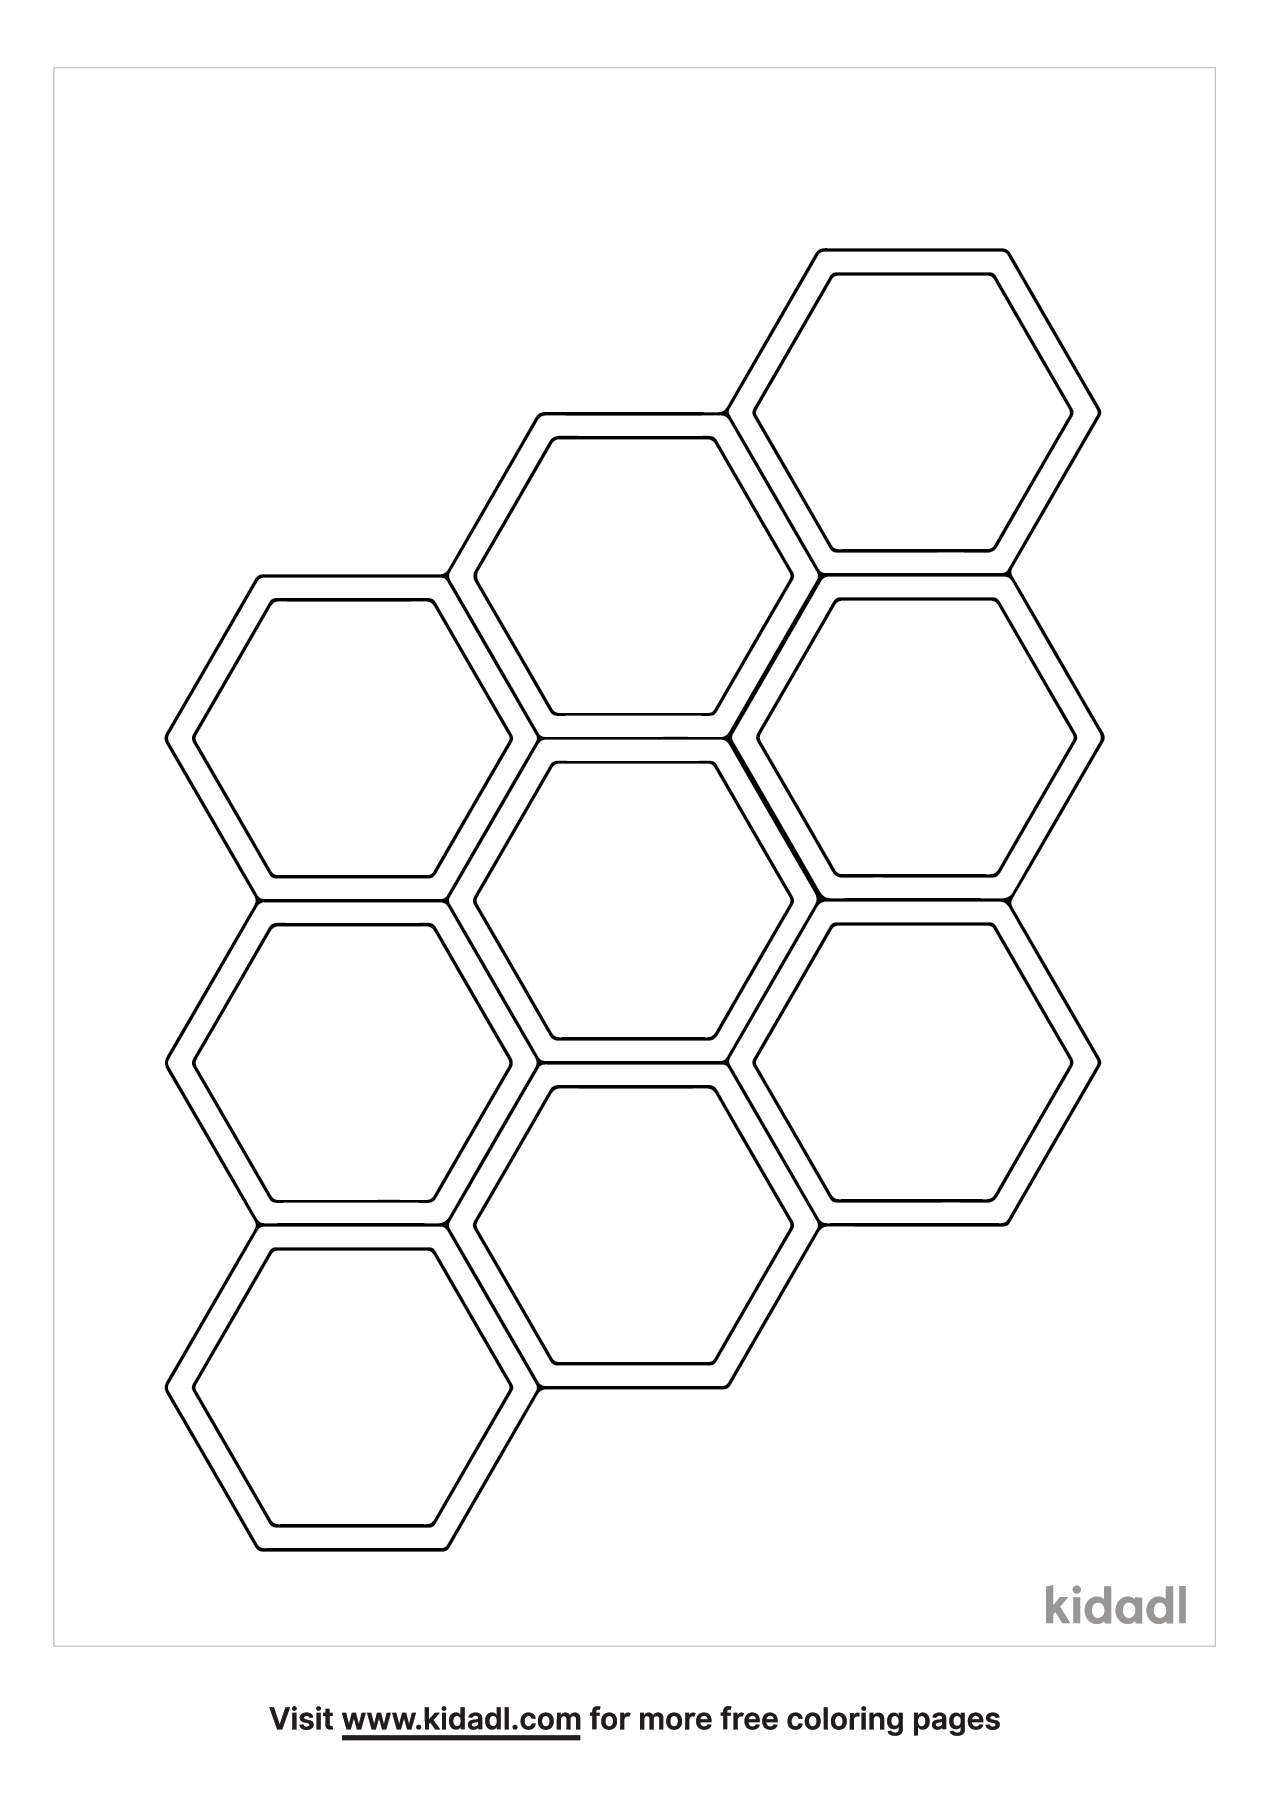 Hexagon 3 Cool Coloring Page